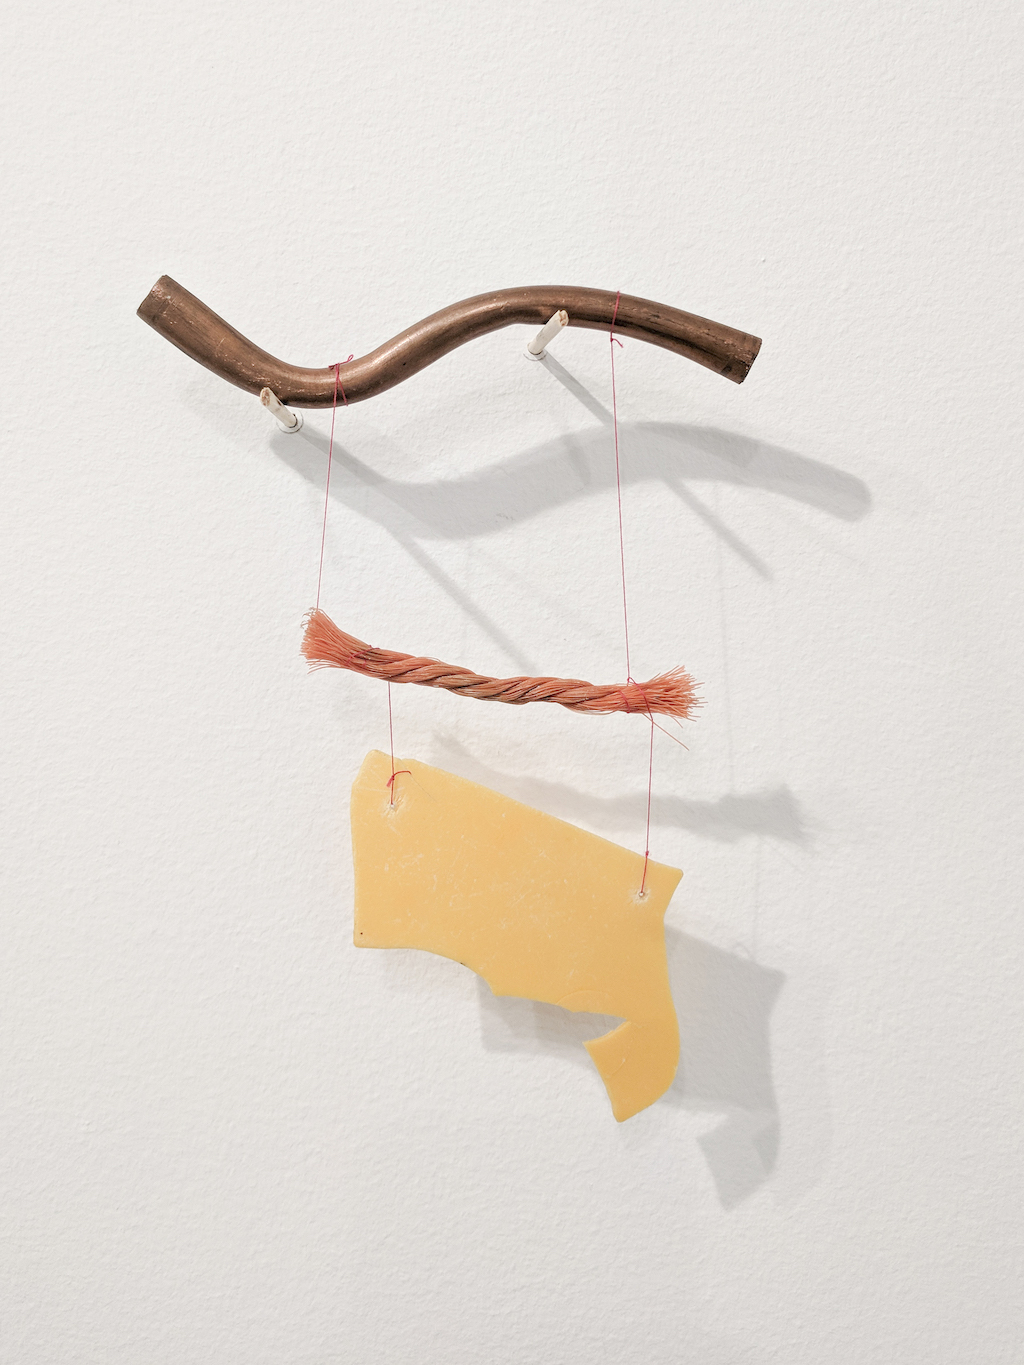 Cecilia Vicuña Tres elementos (Precarios) Mixed media 6 7/8 x 5 3/4 x 1/4 in.  Courtesy of the artist and Lehmann Maupin, New York, Hong Kong, and Seoul.